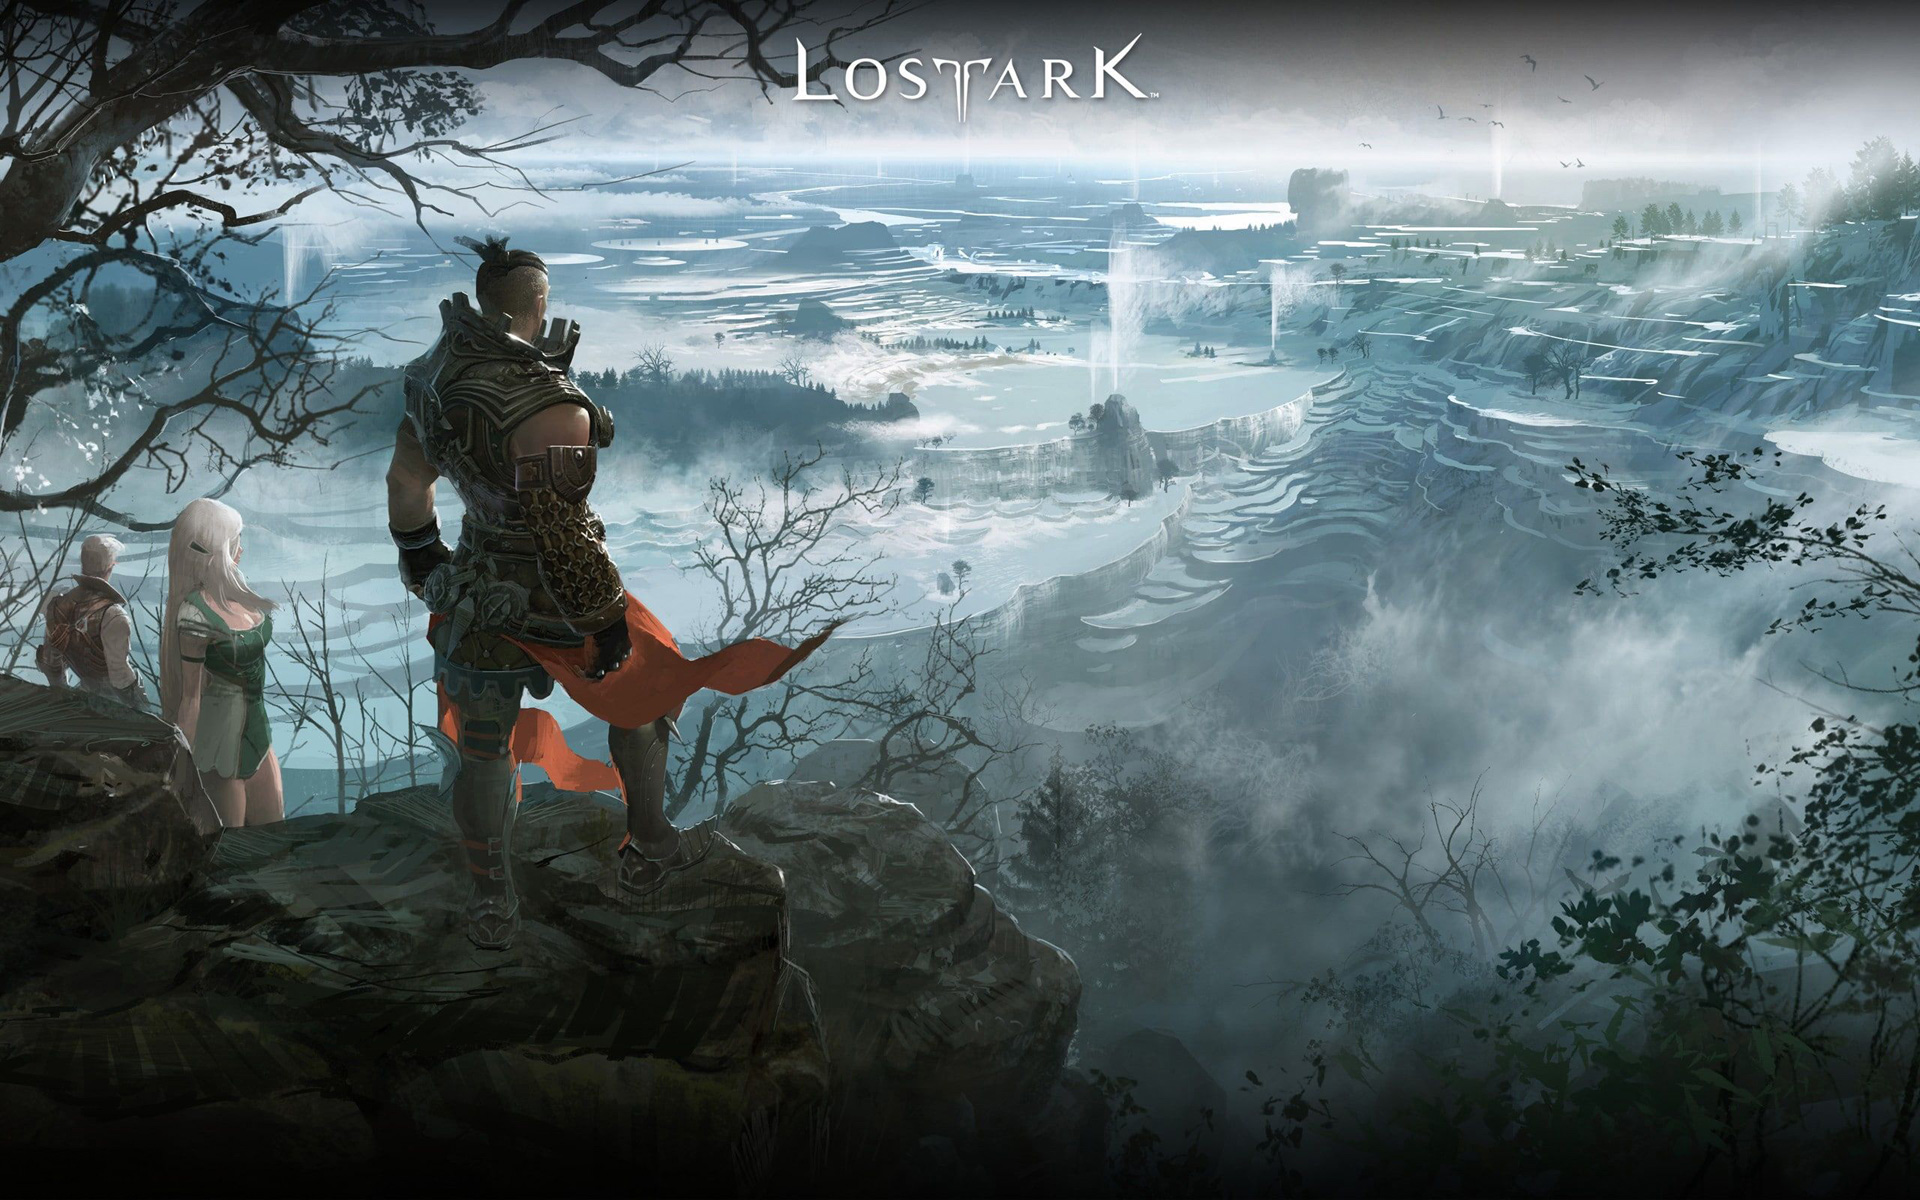 Lost Ark - Download for PC Free